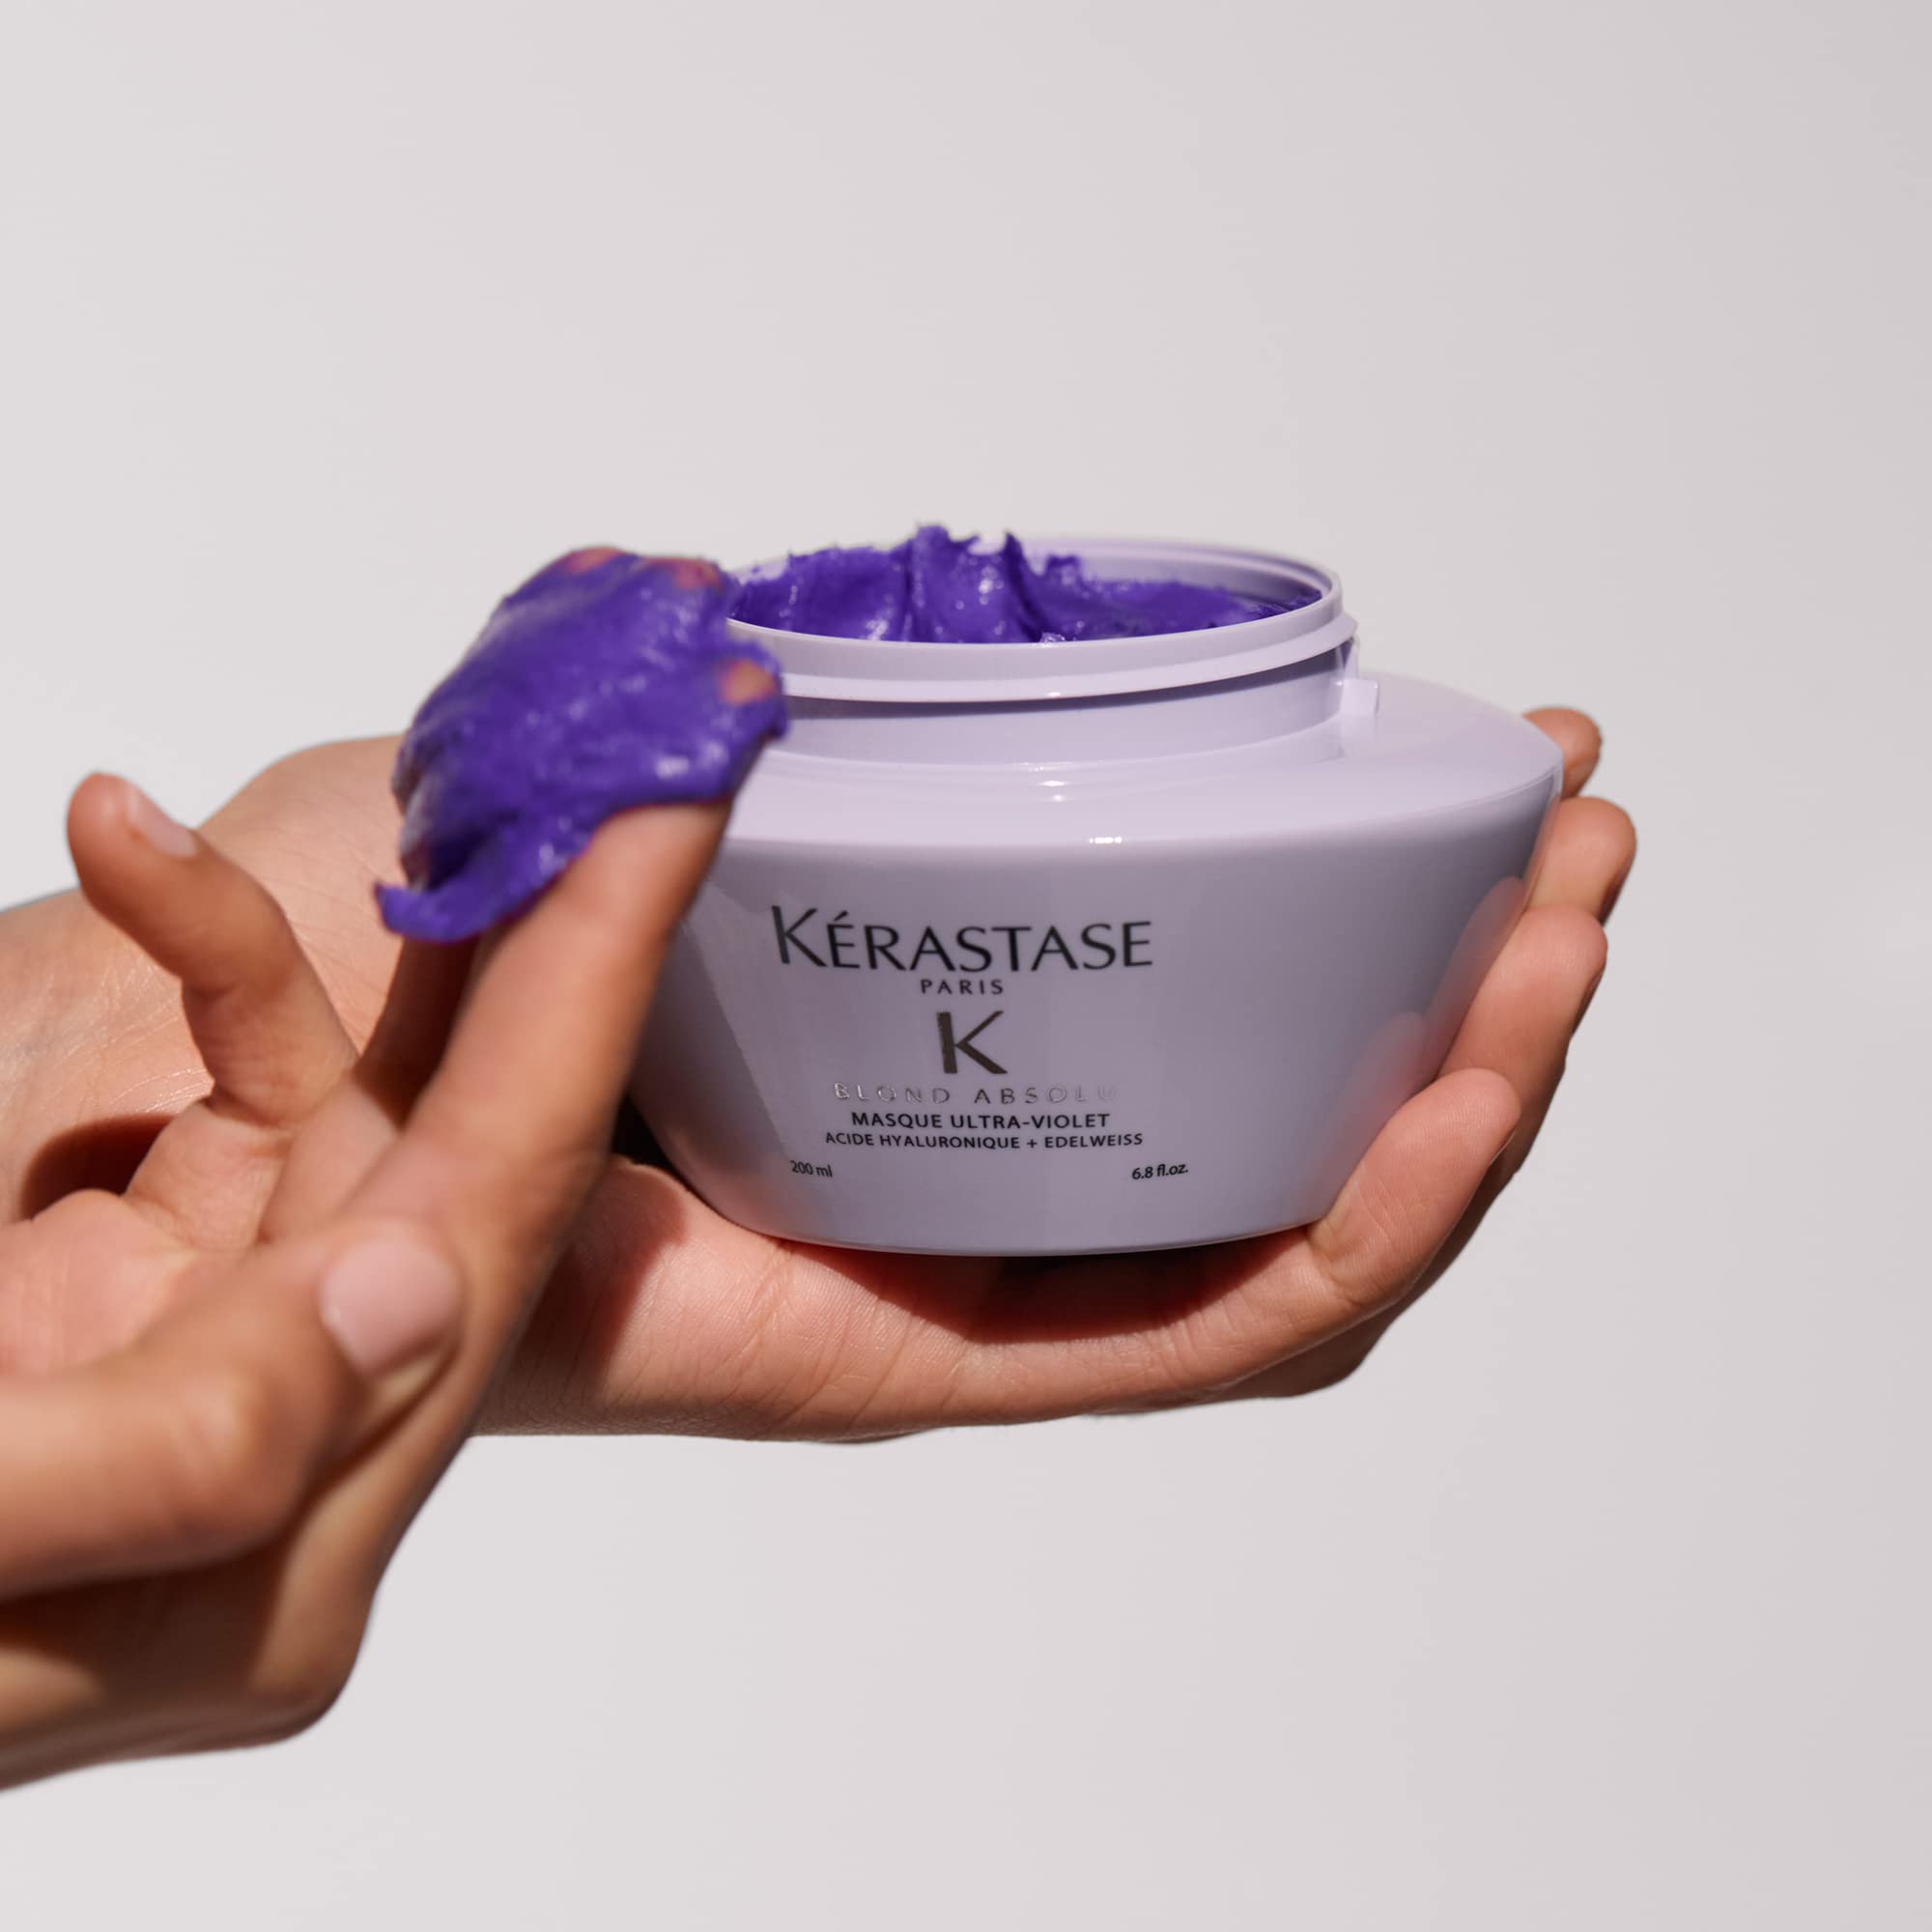 KERASTASE Blond Absolu Ultra-Violet Purple Hair Mask | For Lightened, Highlighted and Grey Hair | Neutralizes Brassy and Yellow Undertones | Nourishes and Protects | With Hyaluronic Acid | 6.8 Fl Oz